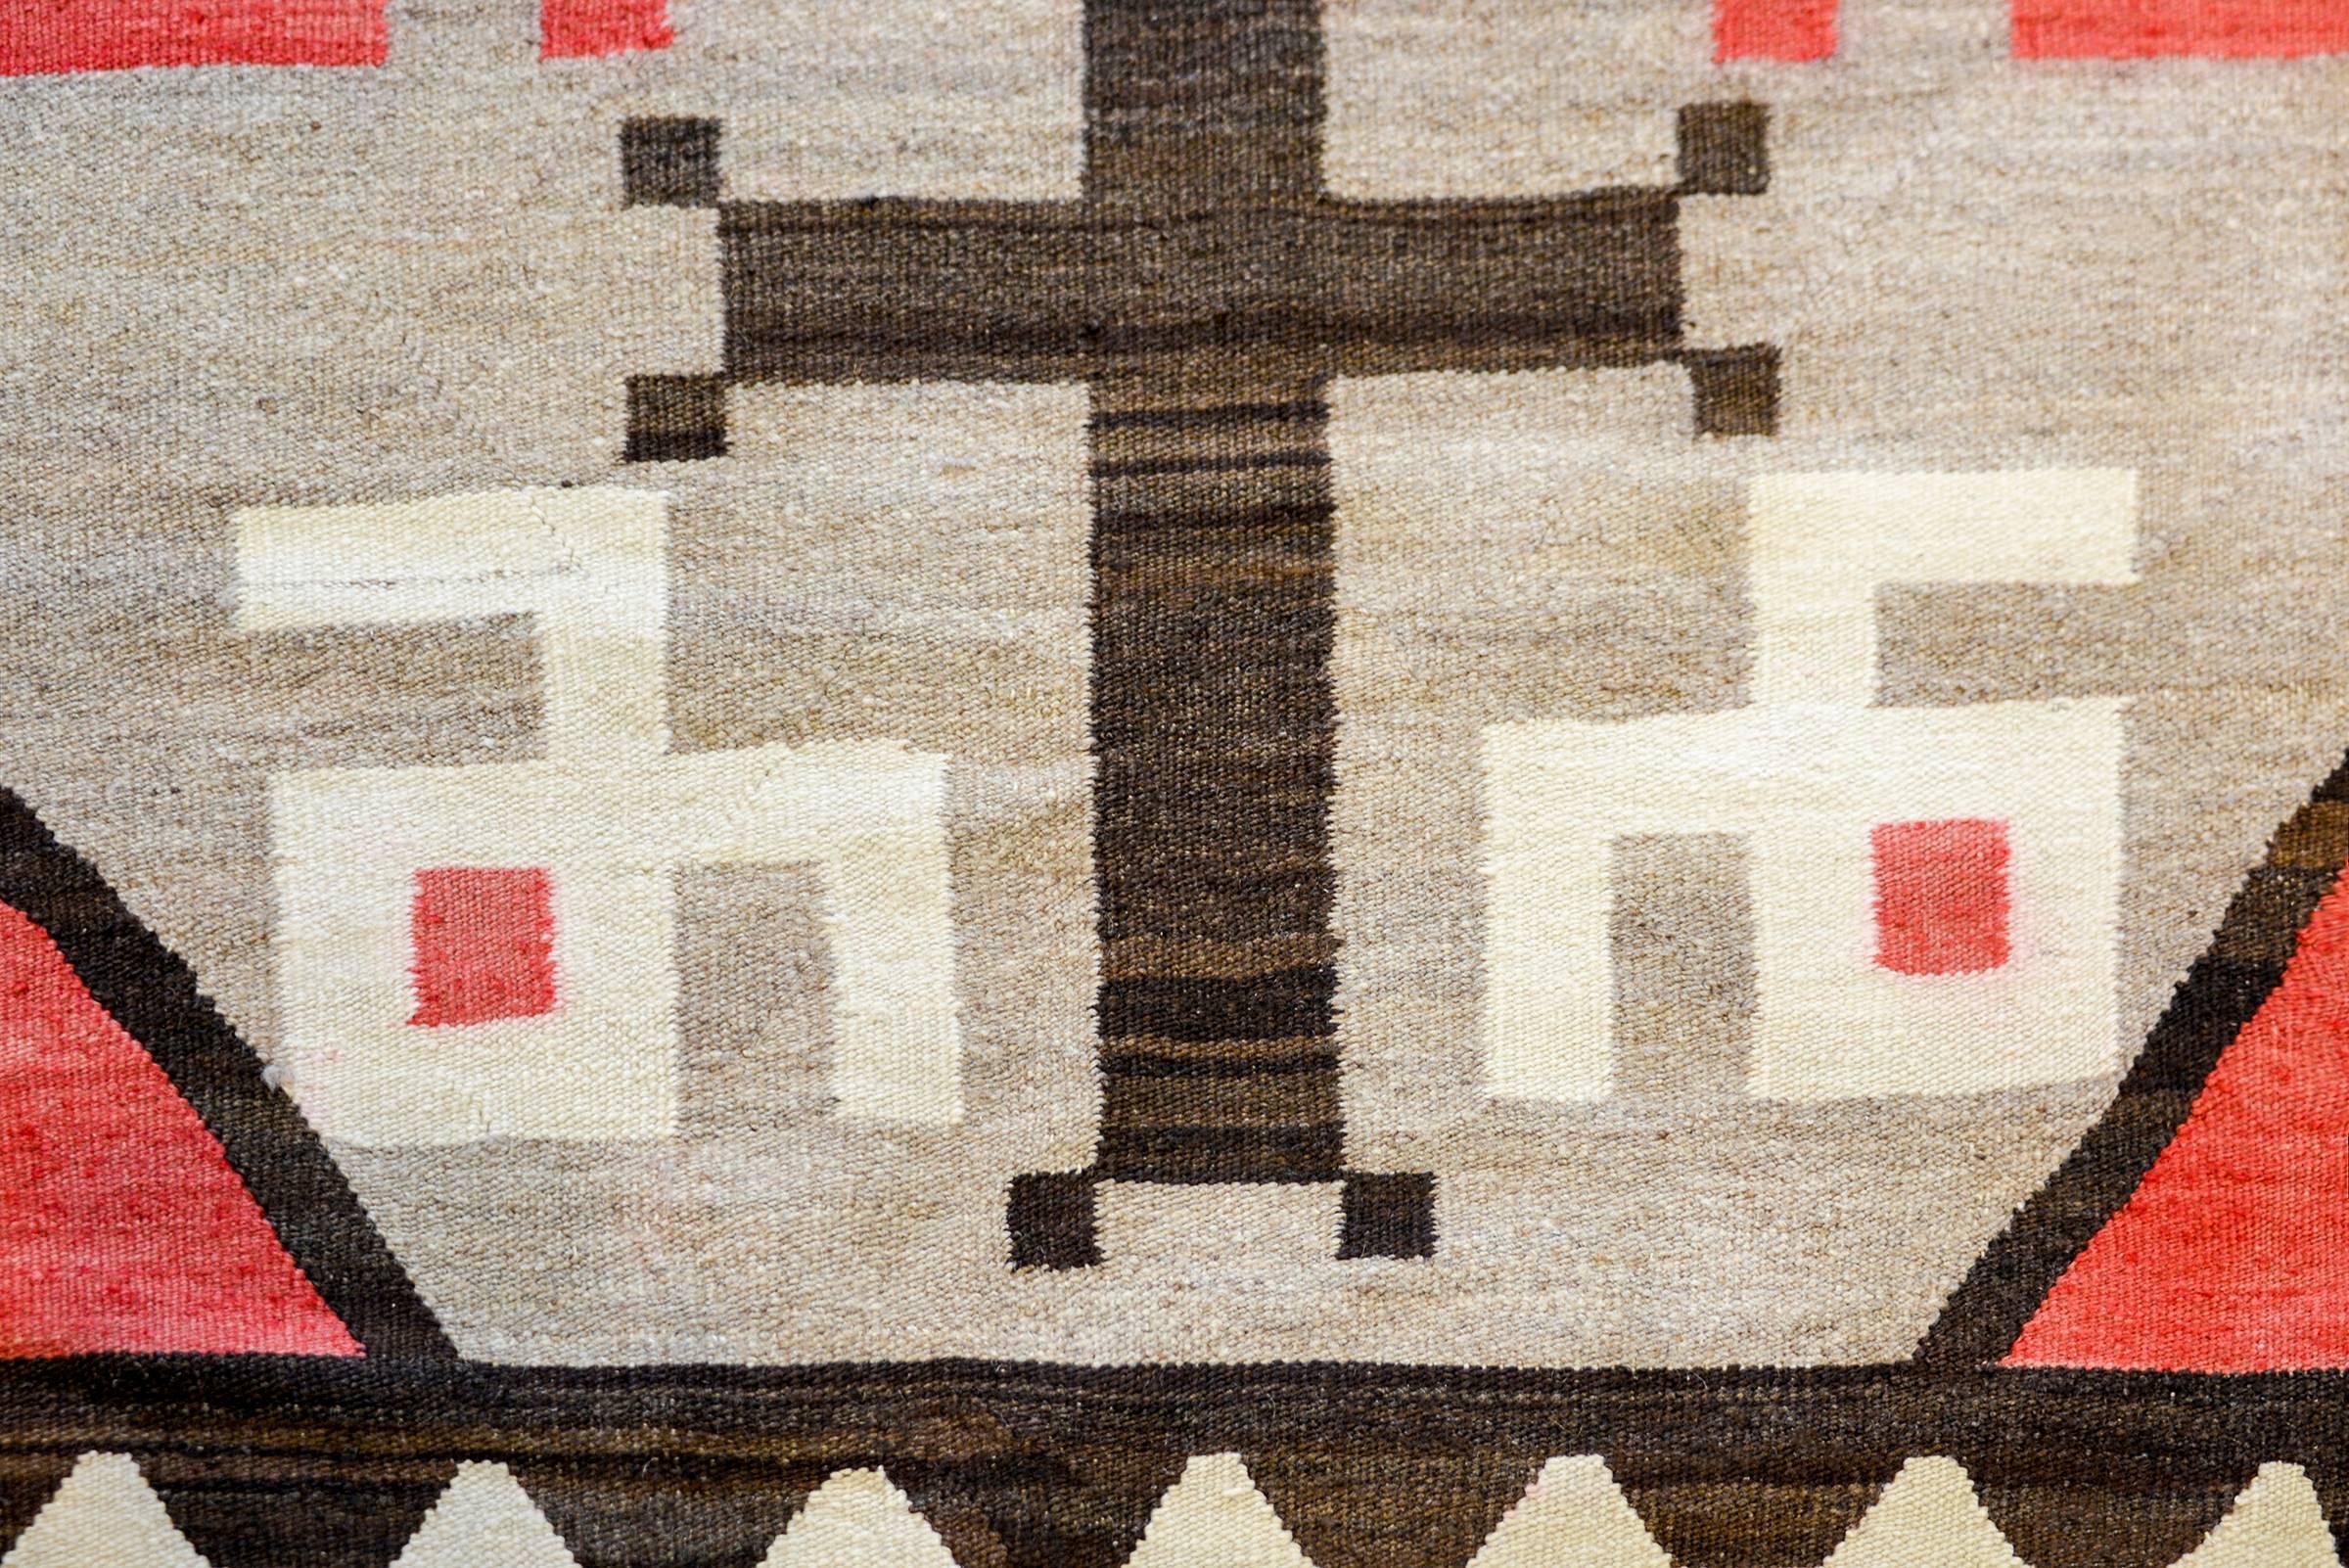 A striking mid-20th century Navajo rug with a bold pattern containing large-scale crosses amidst a field of red and white swirls on an brash grey background. The border is wide with a white zigzag stripe on a natural brown wool stripe with grey and